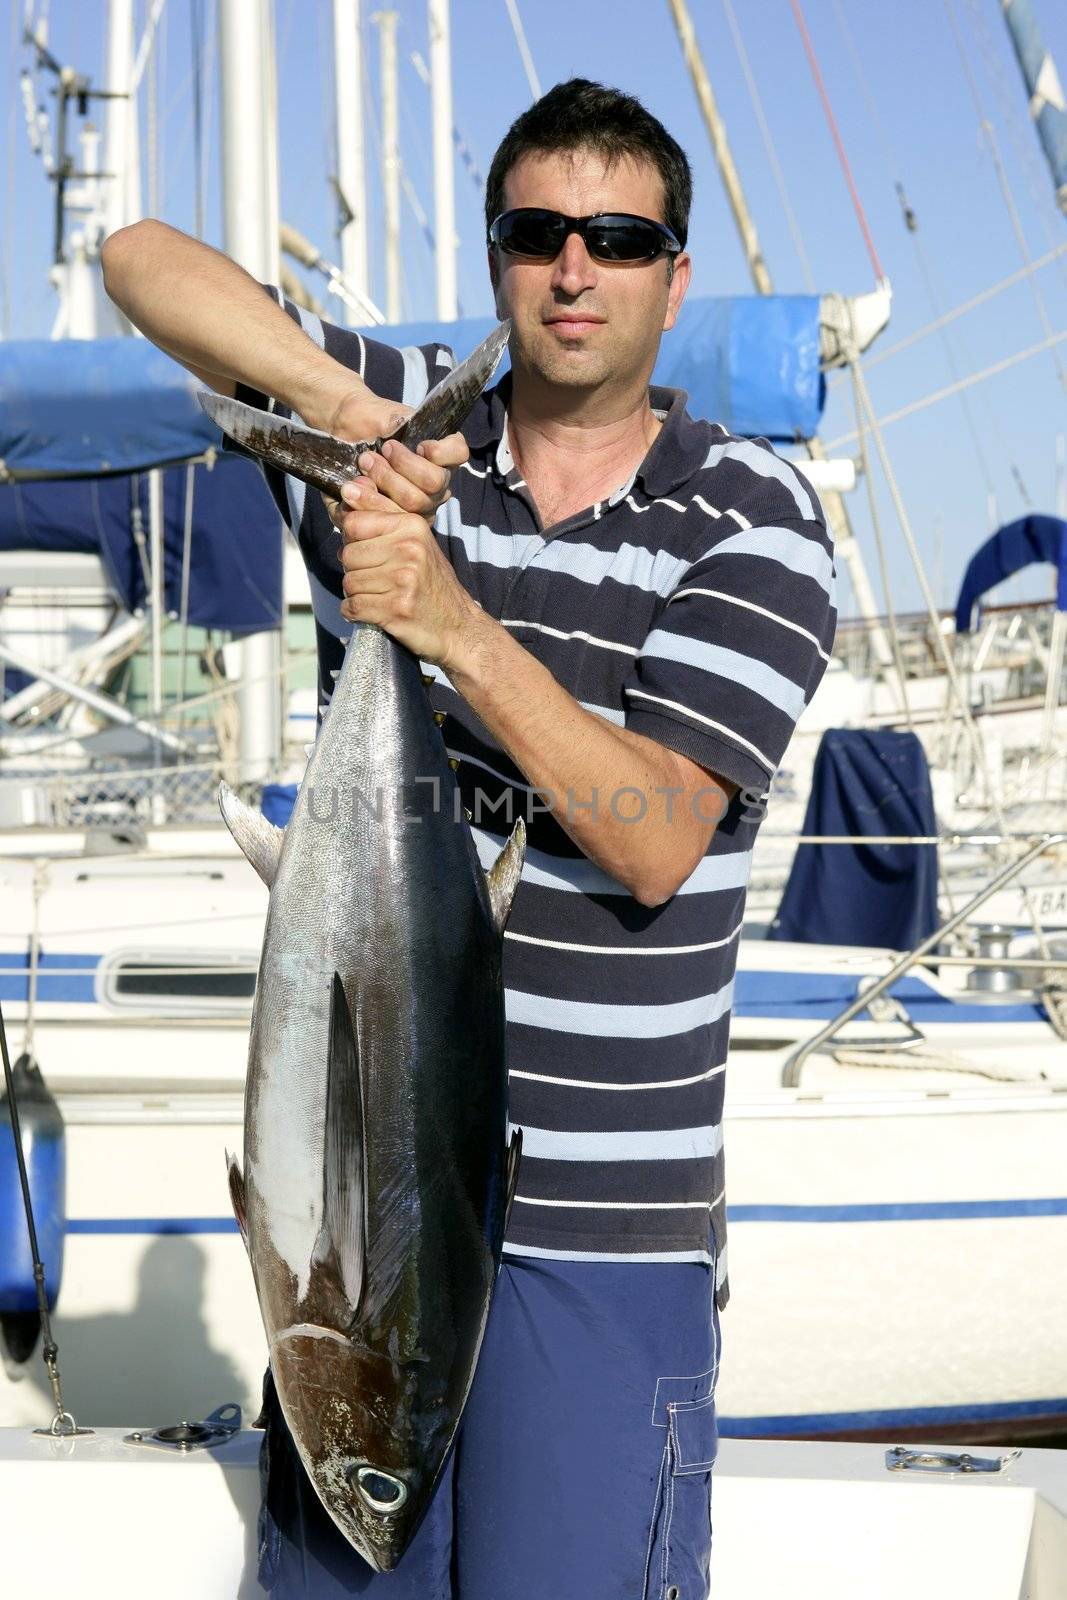 Big game fisherman with saltwater tuna catch in his hands